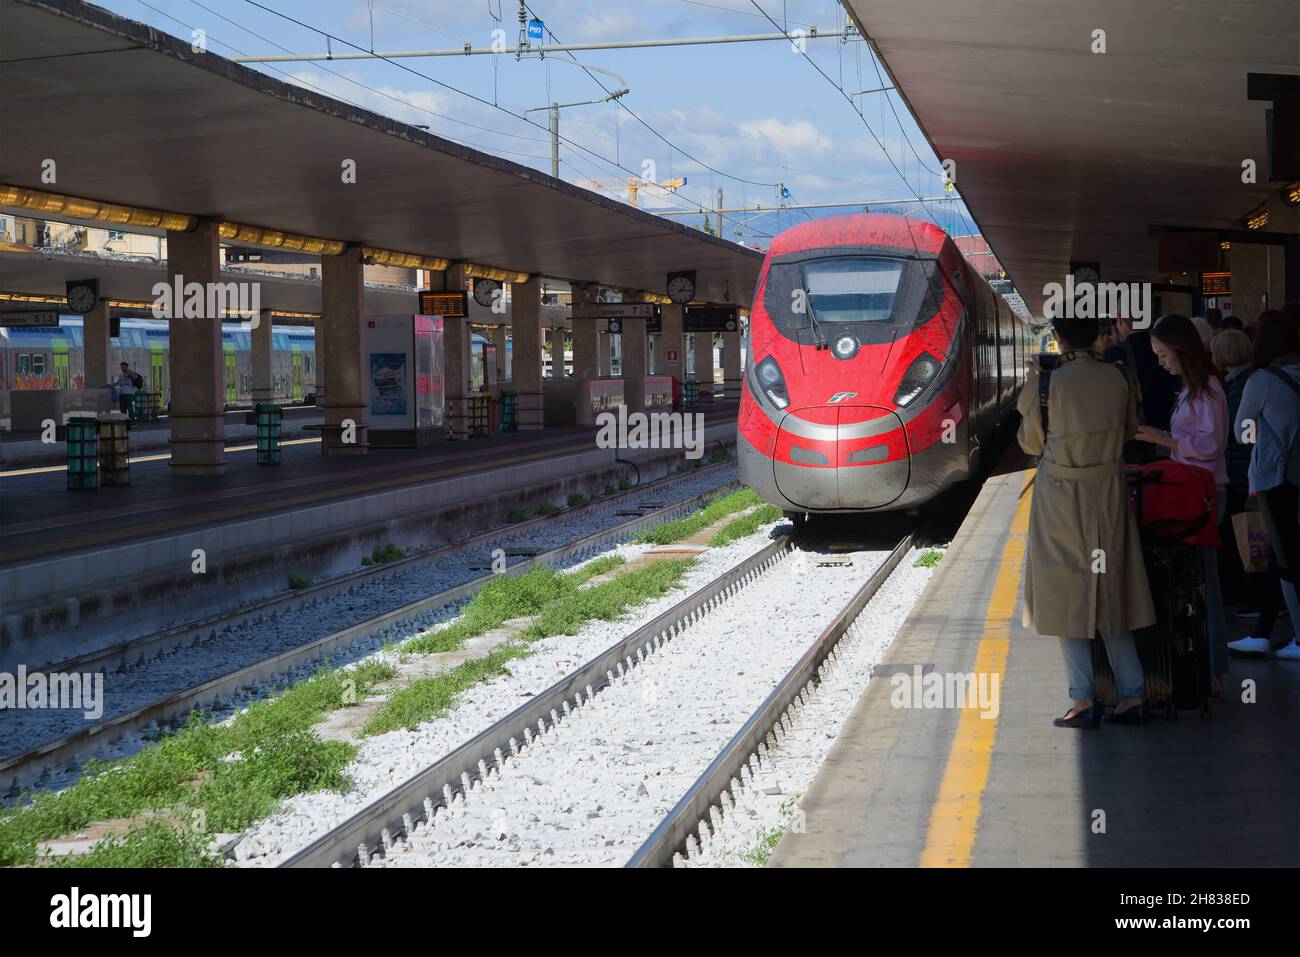 FLORENCE, ITALY - SEPTEMBER 25, 2017: The high-speed train Frecciarossa ETR.1000 of the Trenitaliya company arrives to the platform of the central rai Stock Photo